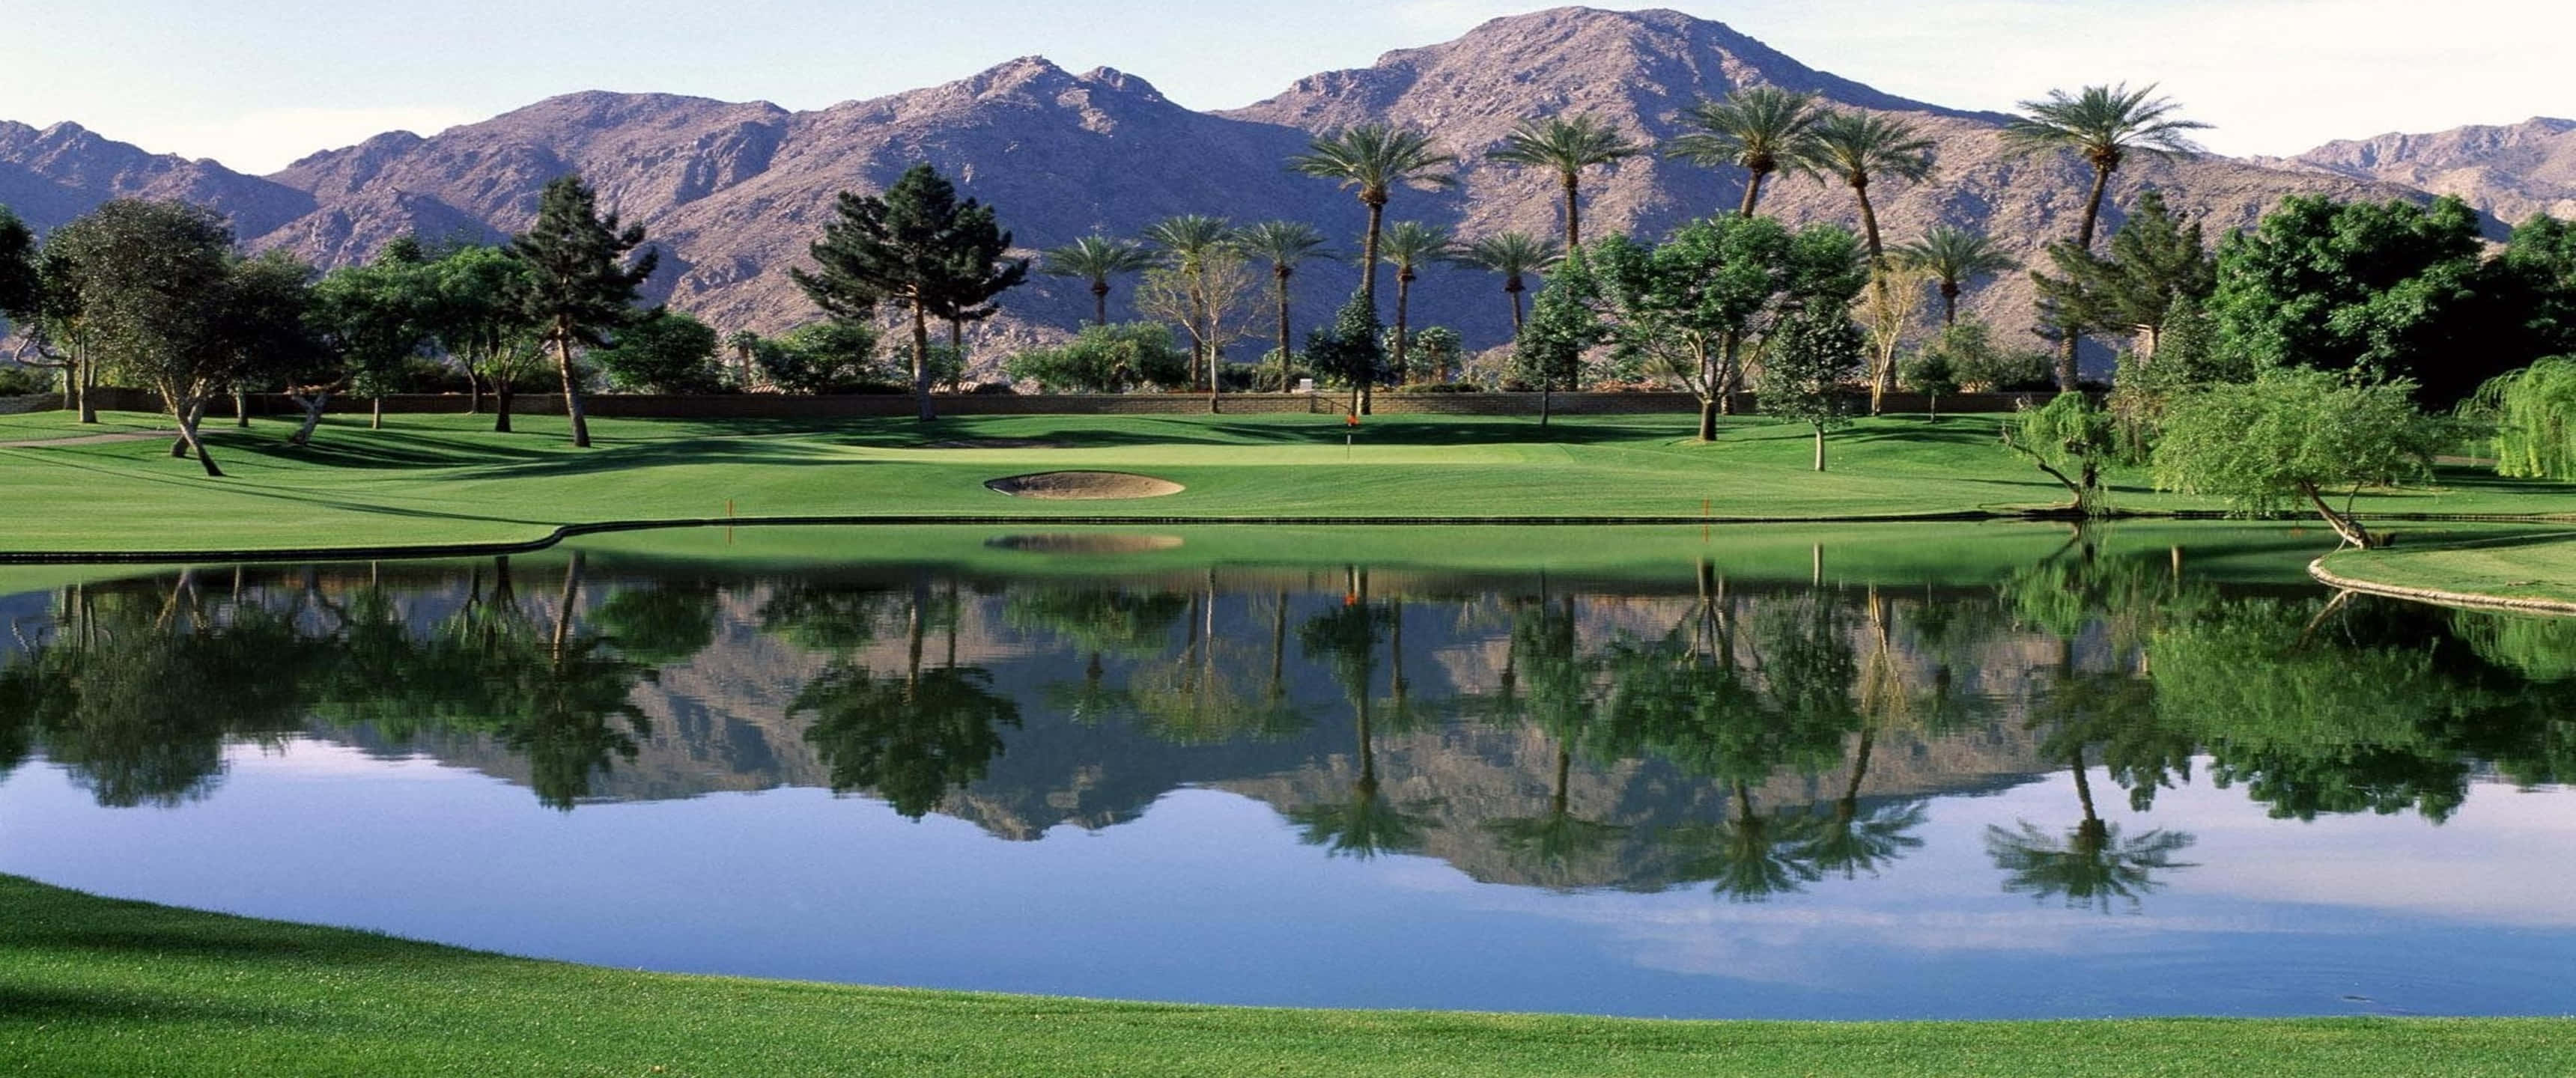 3440x1440p Golf Course Background With Pga West Background